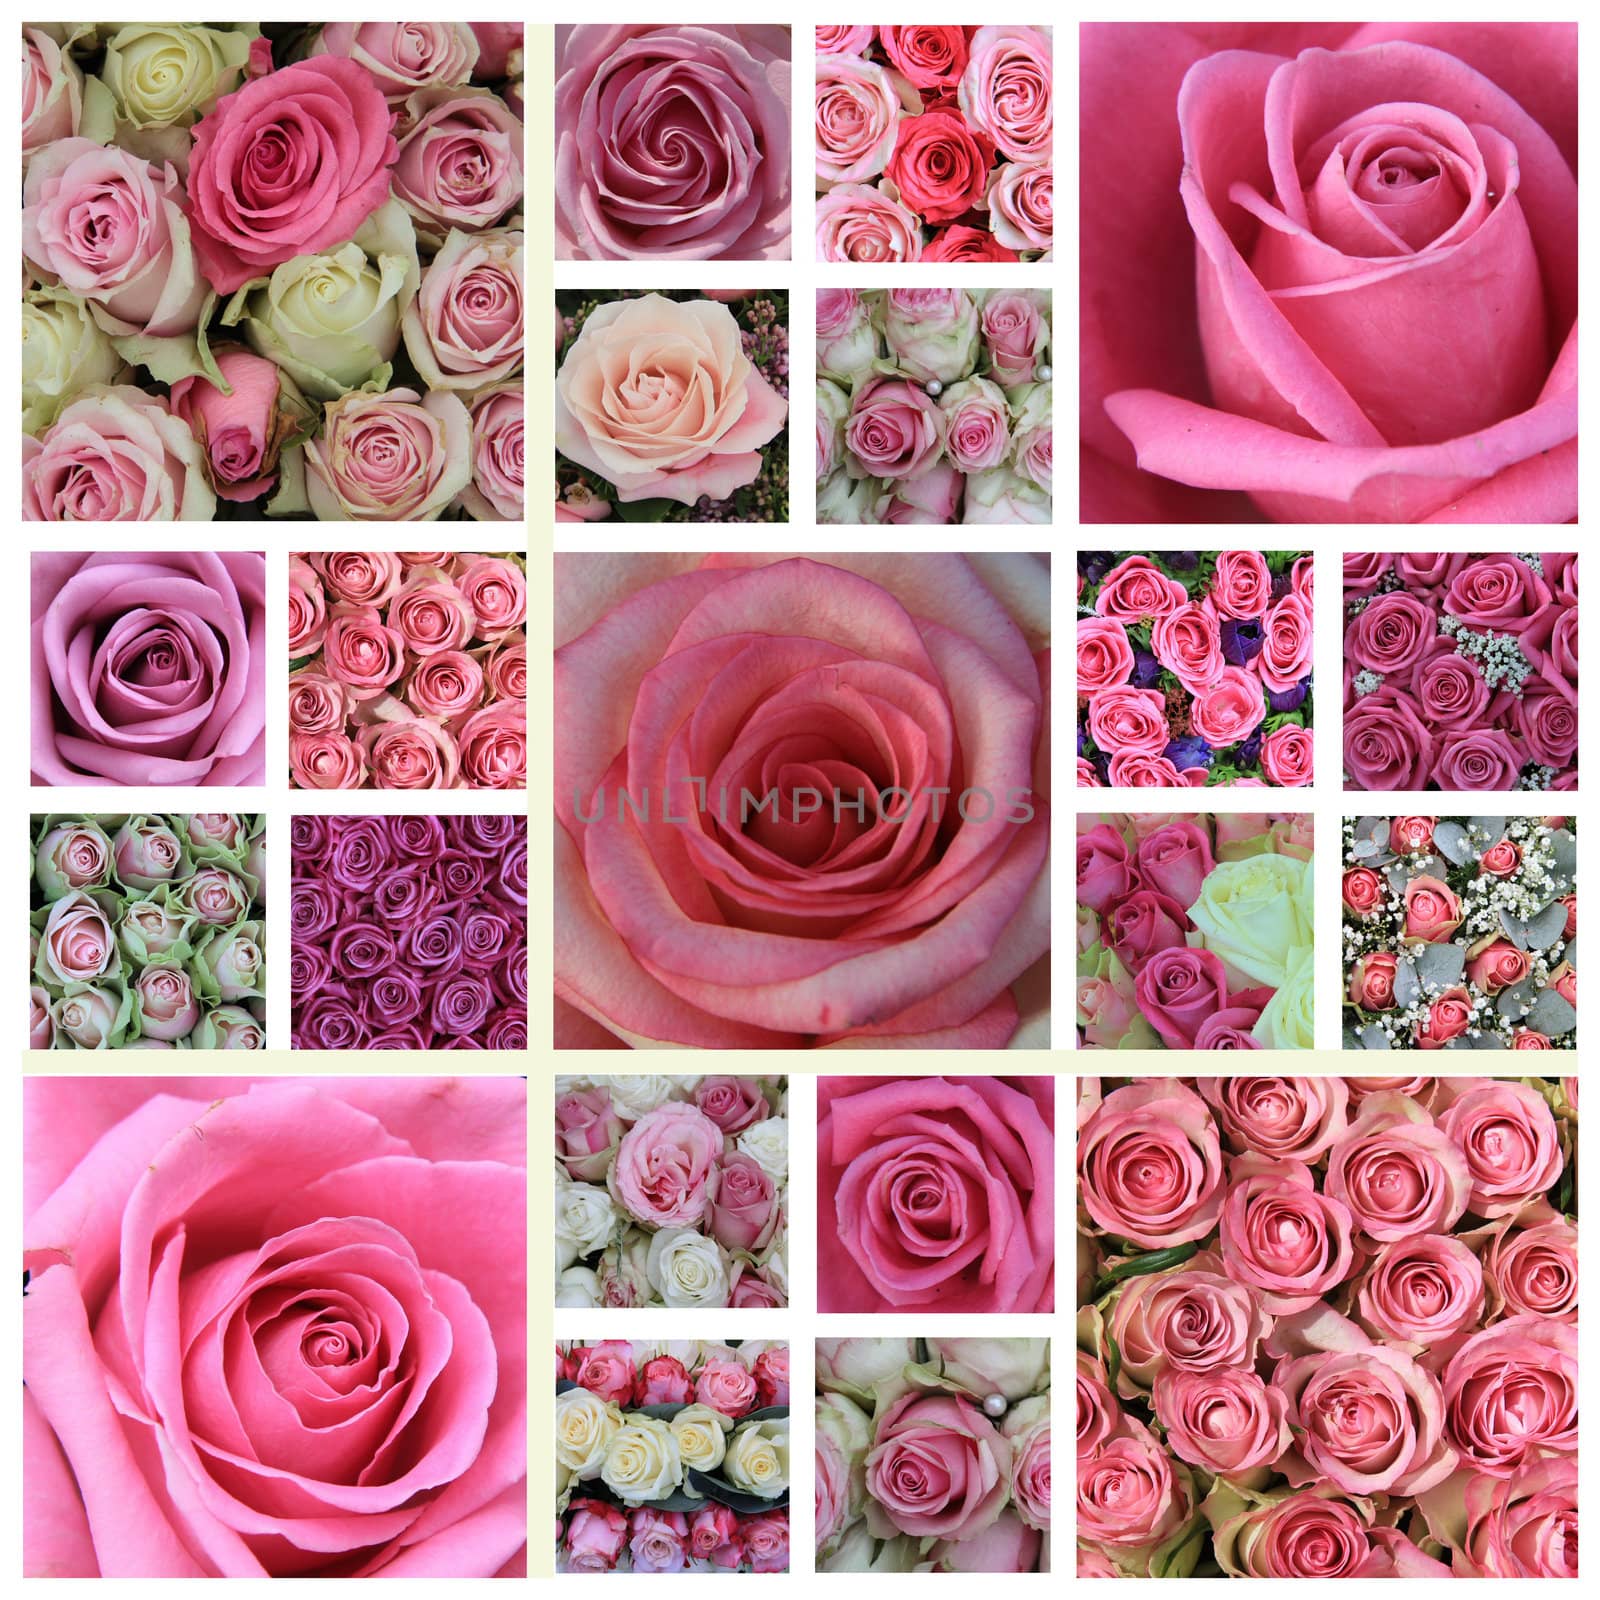 Pink rose high resolution collage by studioportosabbia